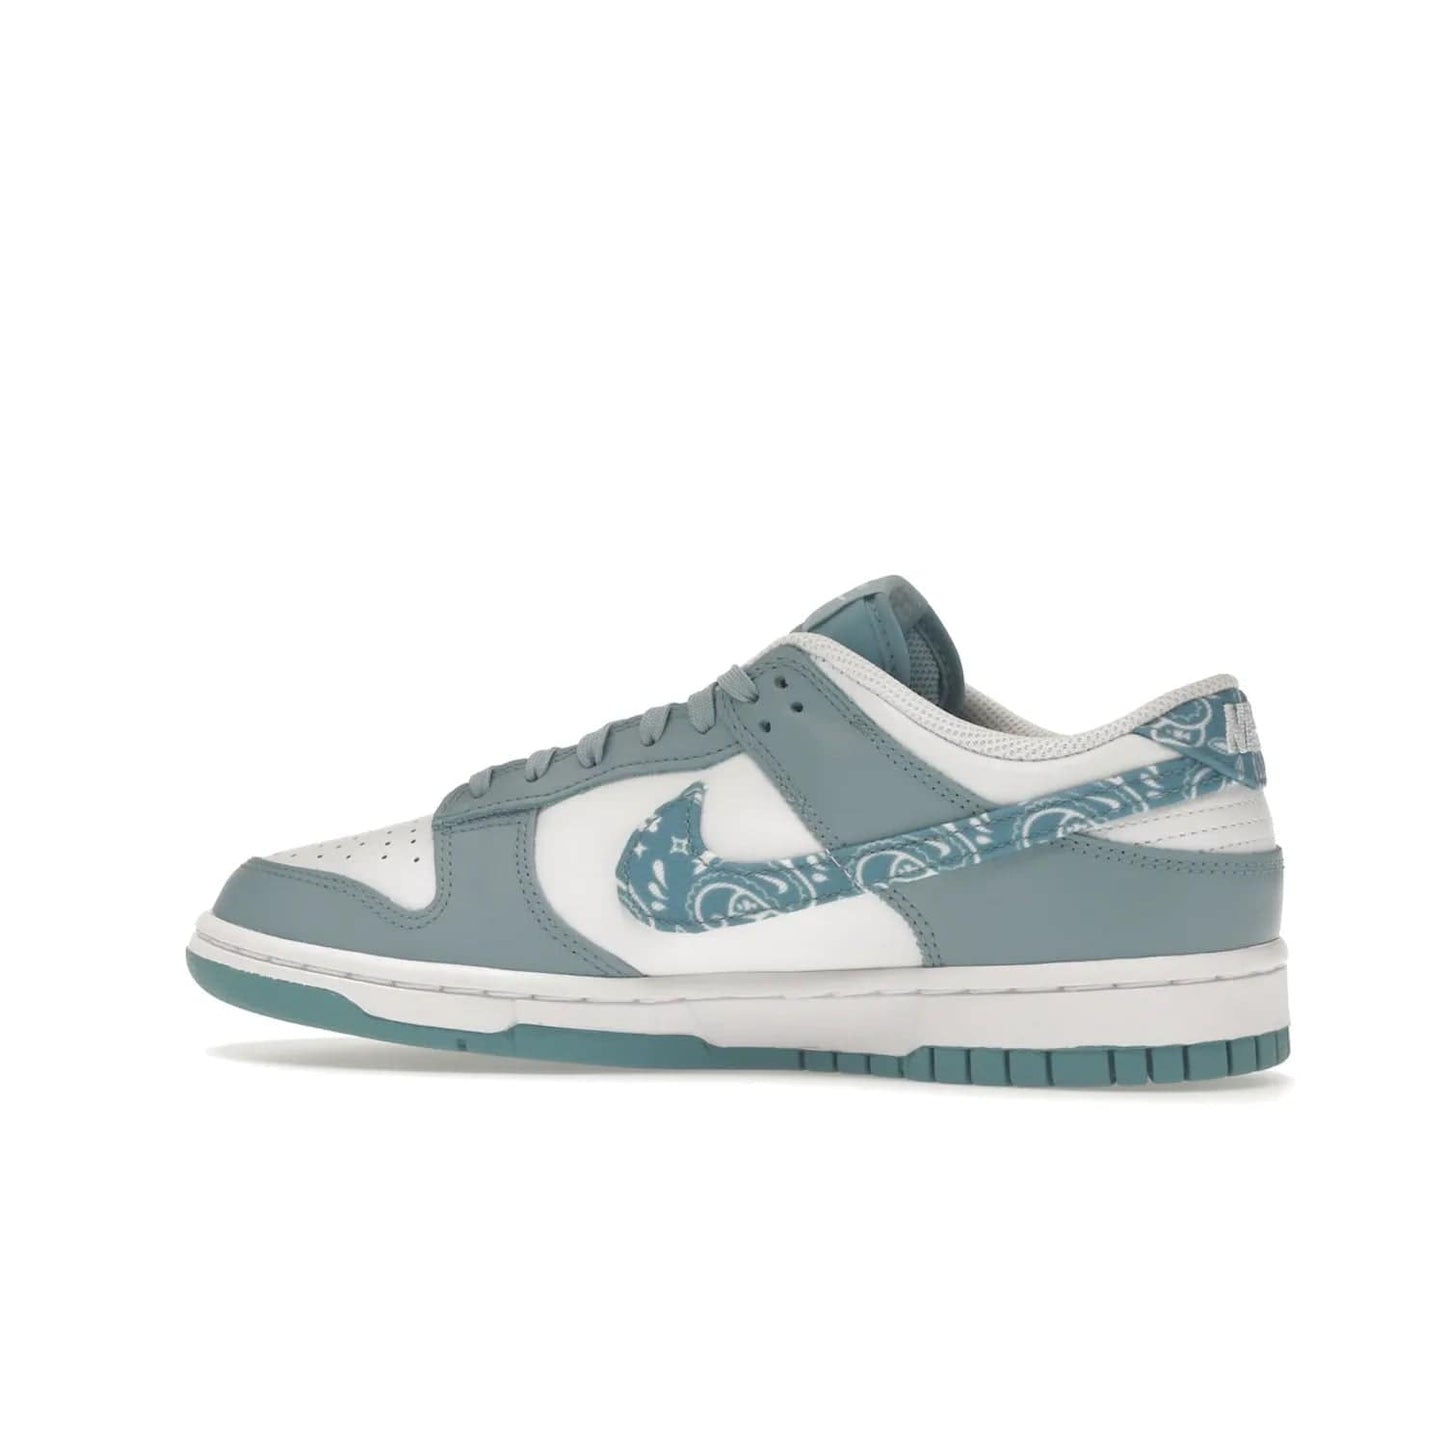 Nike Dunk Low Essential Paisley Pack Worn Blue (Women's) - Image 21 - Only at www.BallersClubKickz.com - Get the Nike Dunk Low Essential Paisley Pack Worn Blue (Women's) for style and comfort. White leather construction, light blue leather overlays, canvas Swooshes and matching heel tabs offer a rich blue hue. Finished by a white and light blue sole, this classic Nike Dunk is the perfect addition to any wardrobe. Released in March 2022.